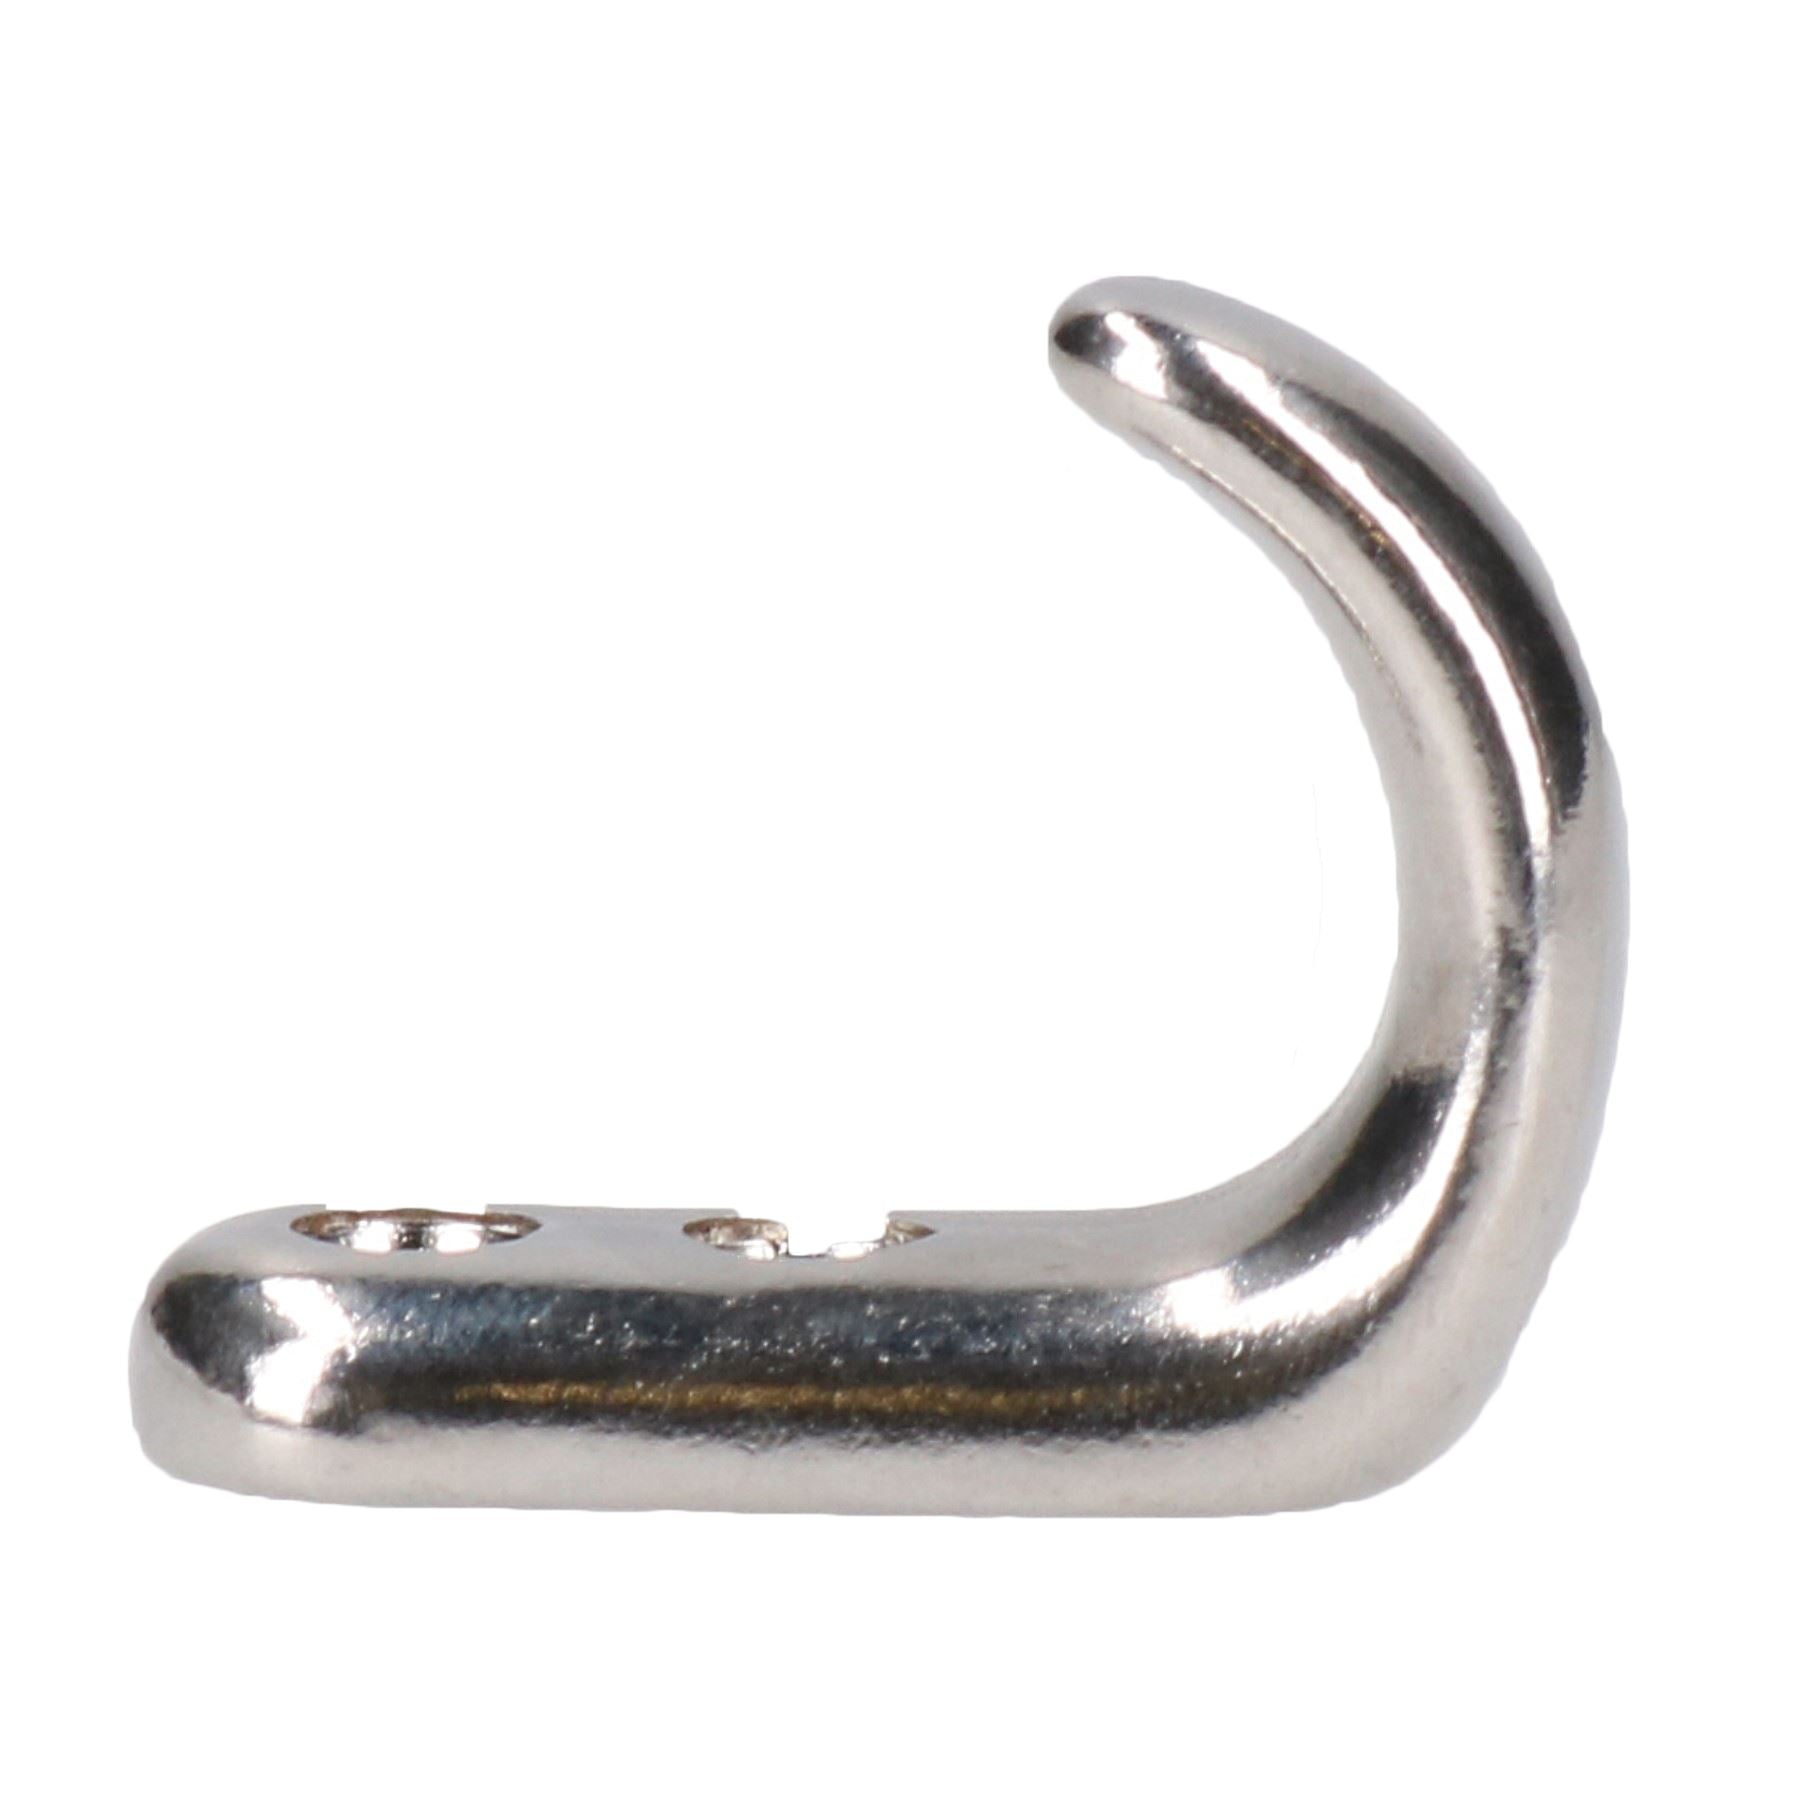 Stainless Steel Coat Hook 40mm by 31mm Polished Marine Grade 316